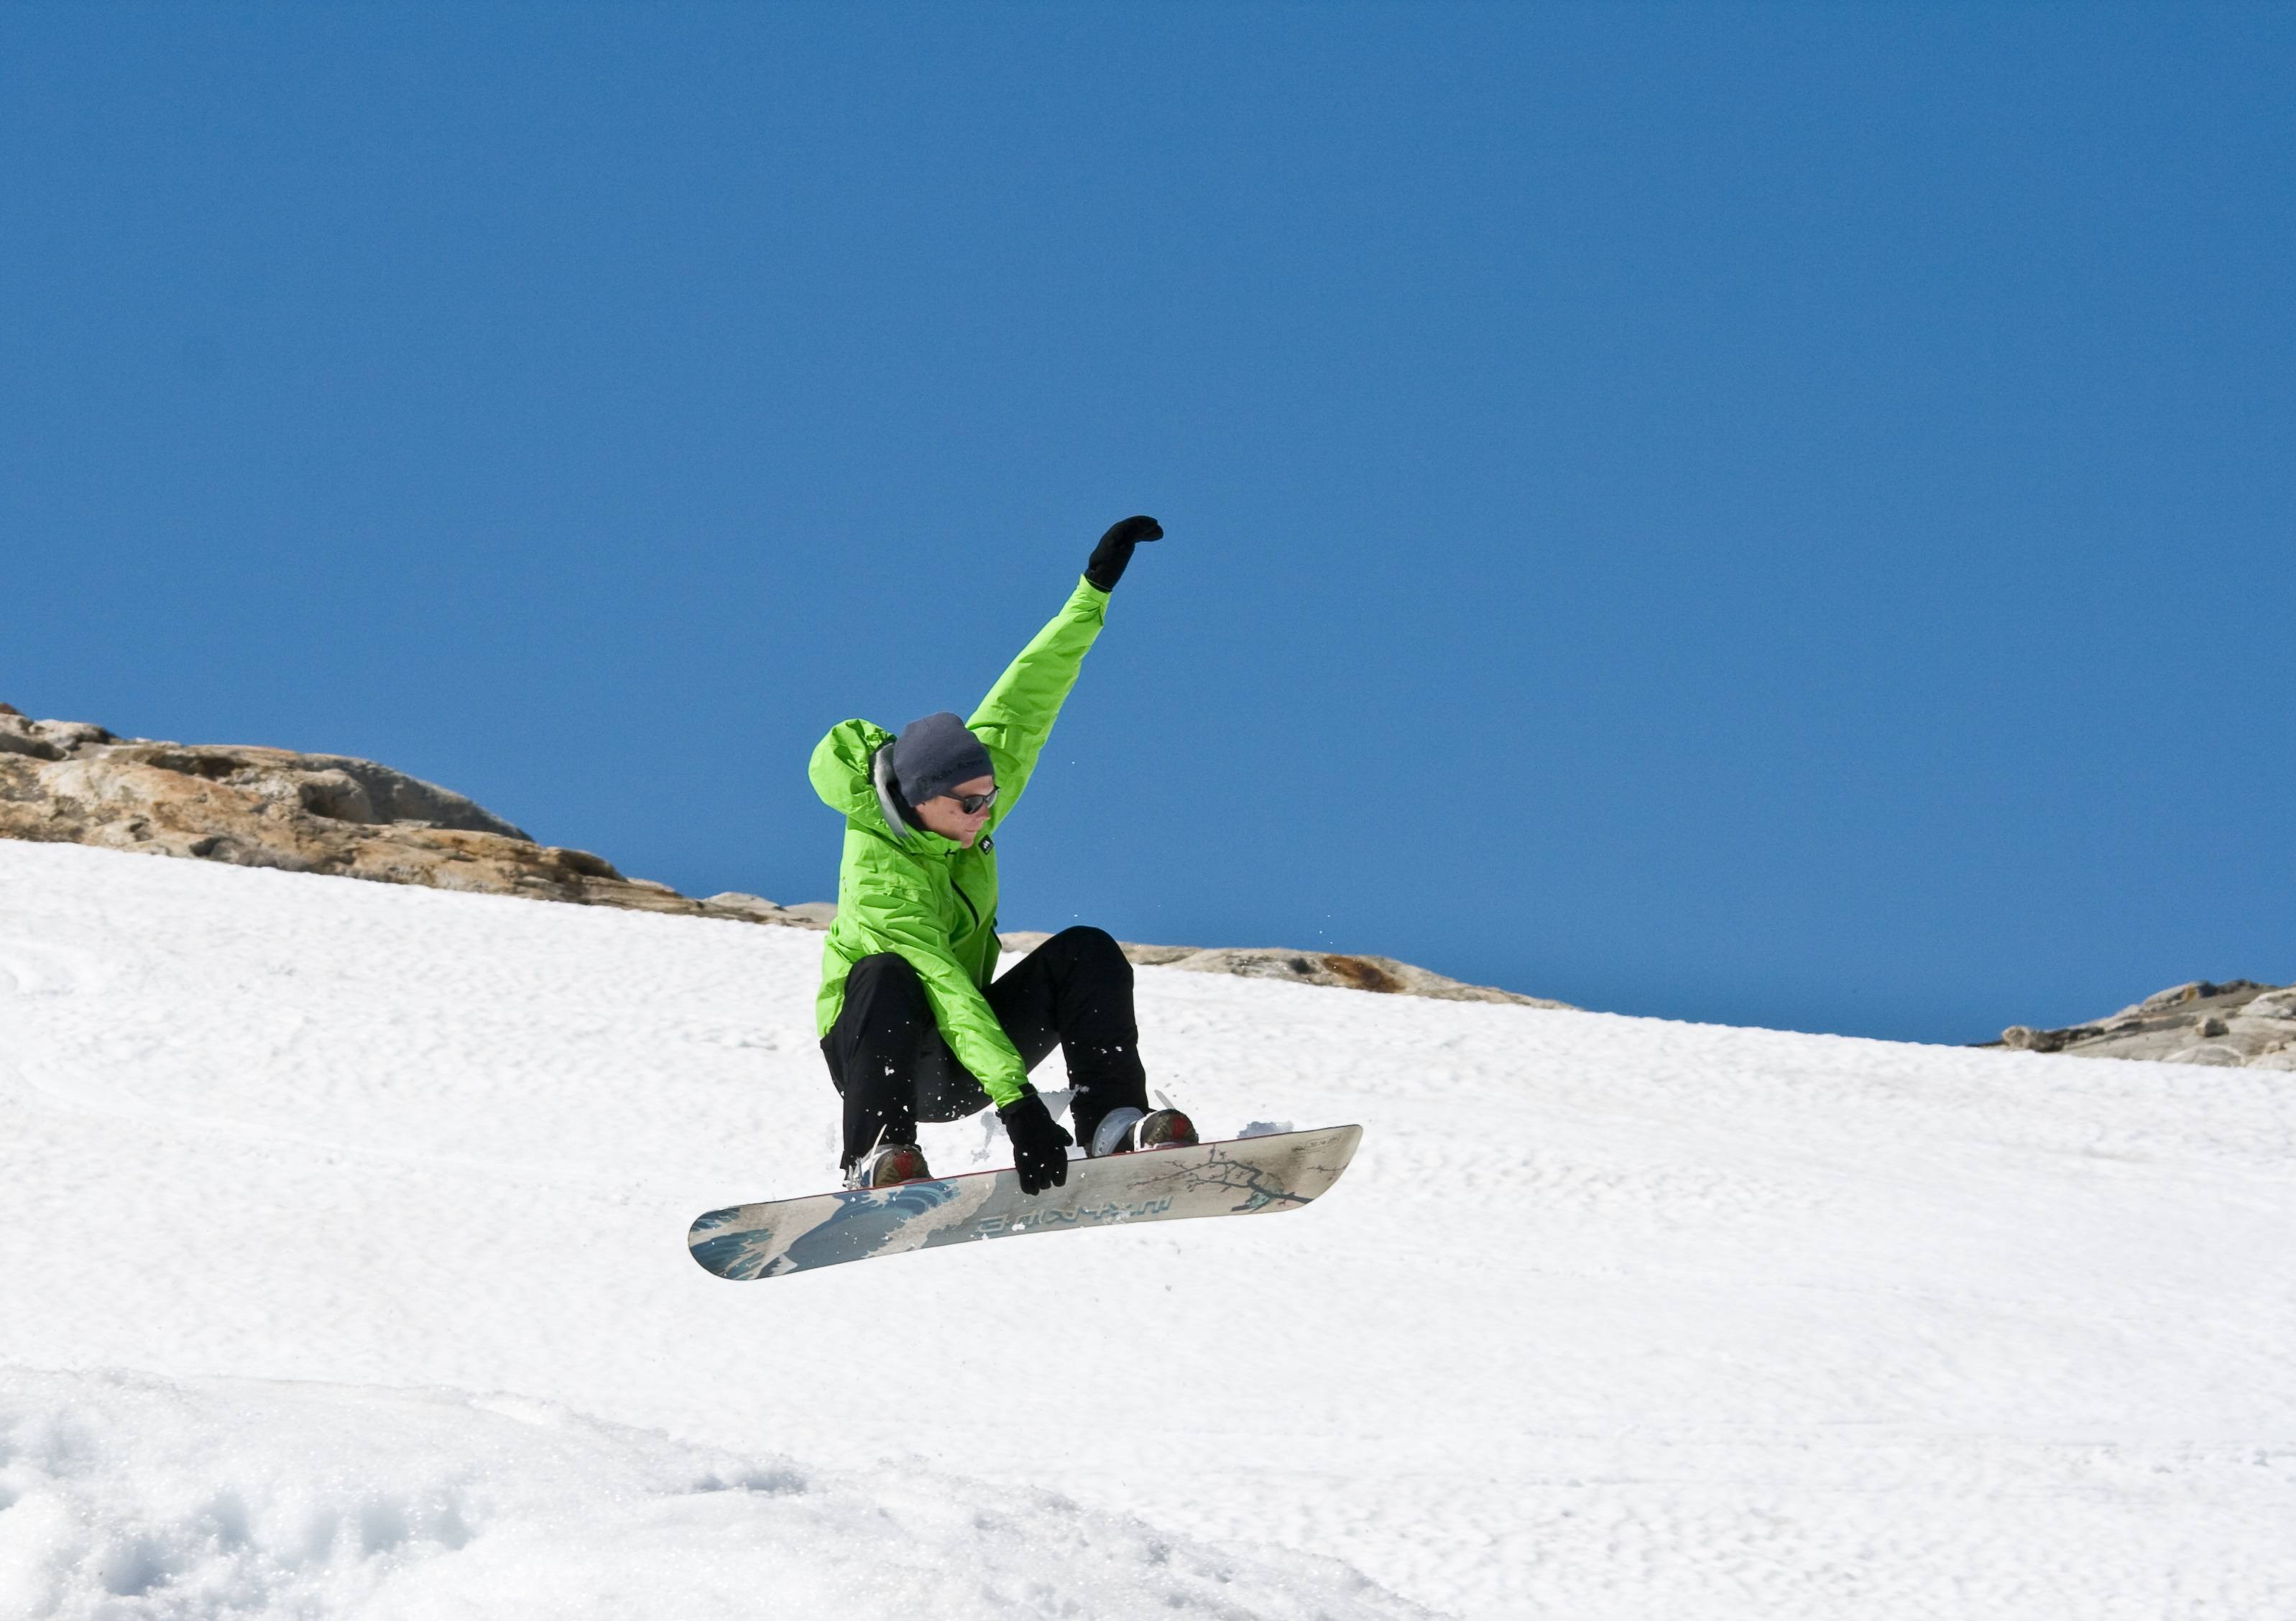 extreme sports demystified - snowboarding